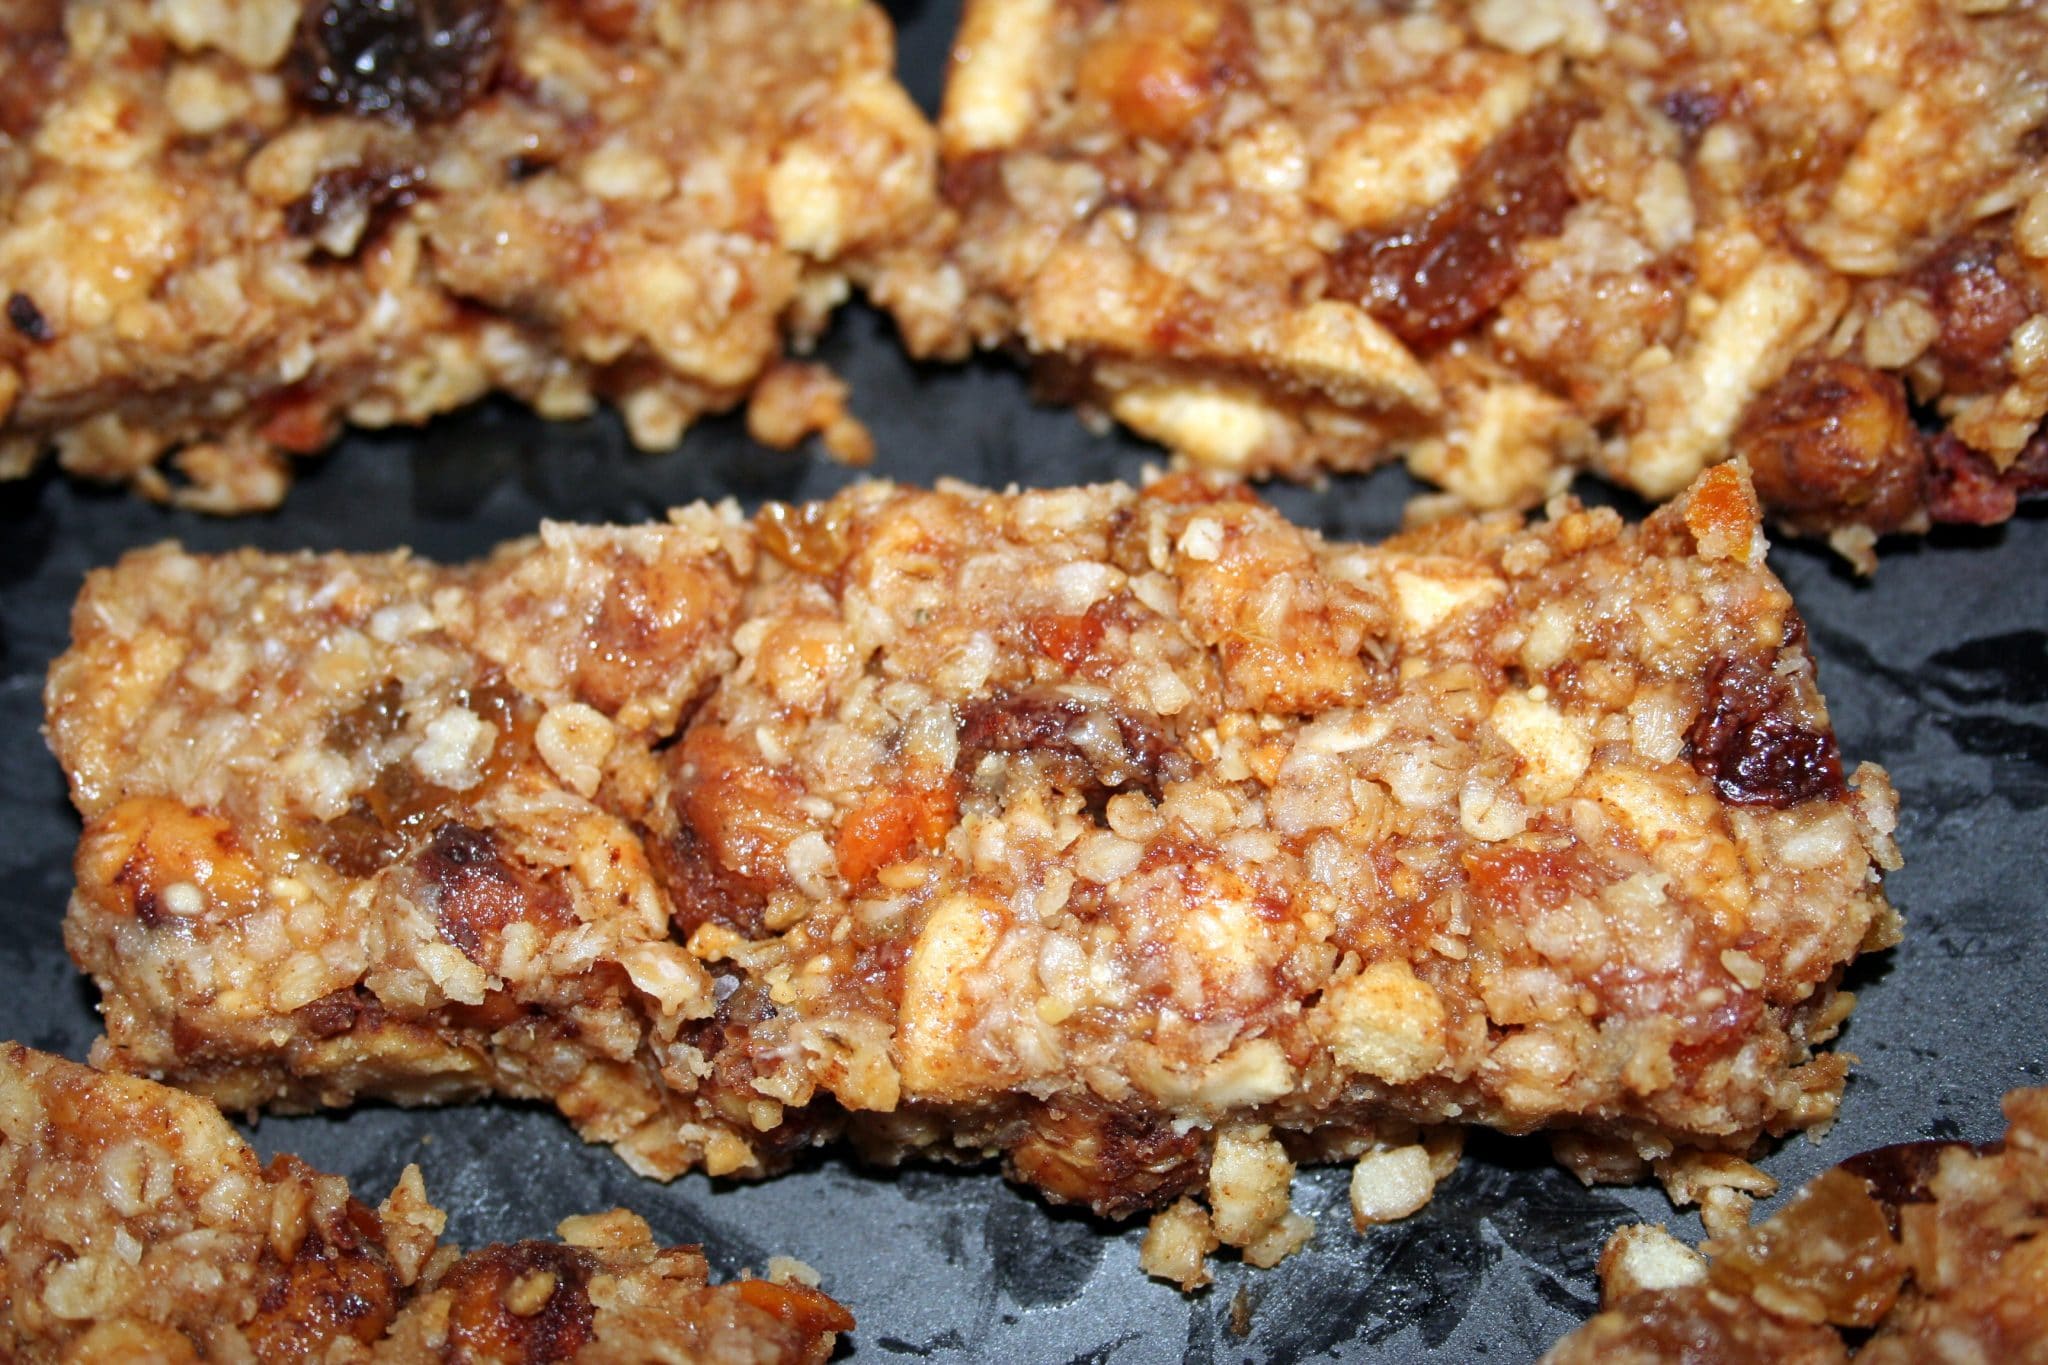 Oven baked Chickpea Granola Bars cooling out of oven